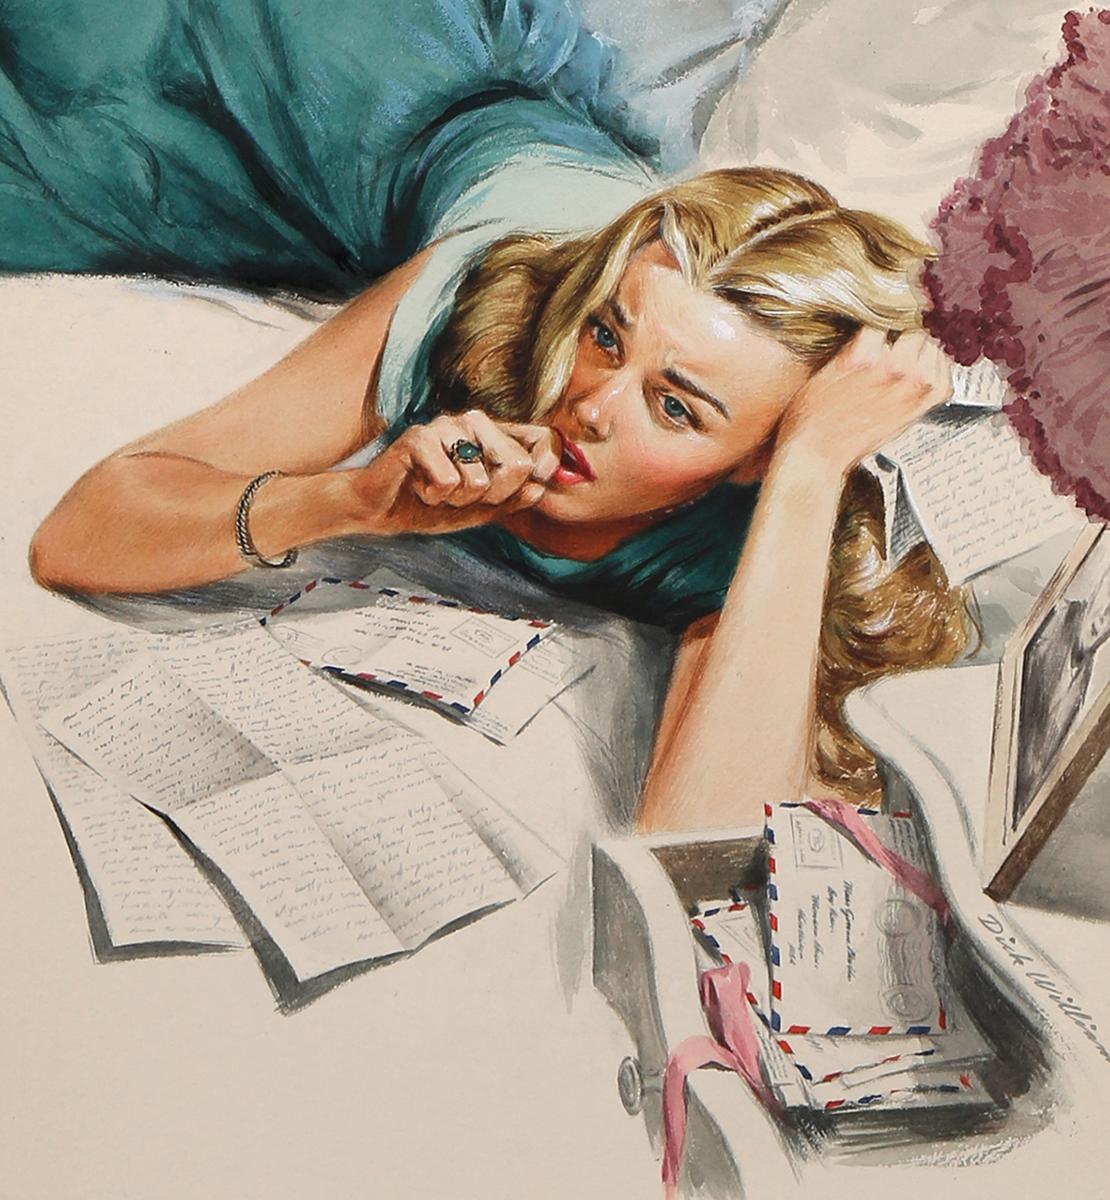 Up for sale is a beautifully rendered and emotionally wrought World War II-era gouache painting by artist and illustrator Dick Williams.

In this published work of art, a young, blonde haired, blue-eyed, girl-next-door lies on her bed surrounded by